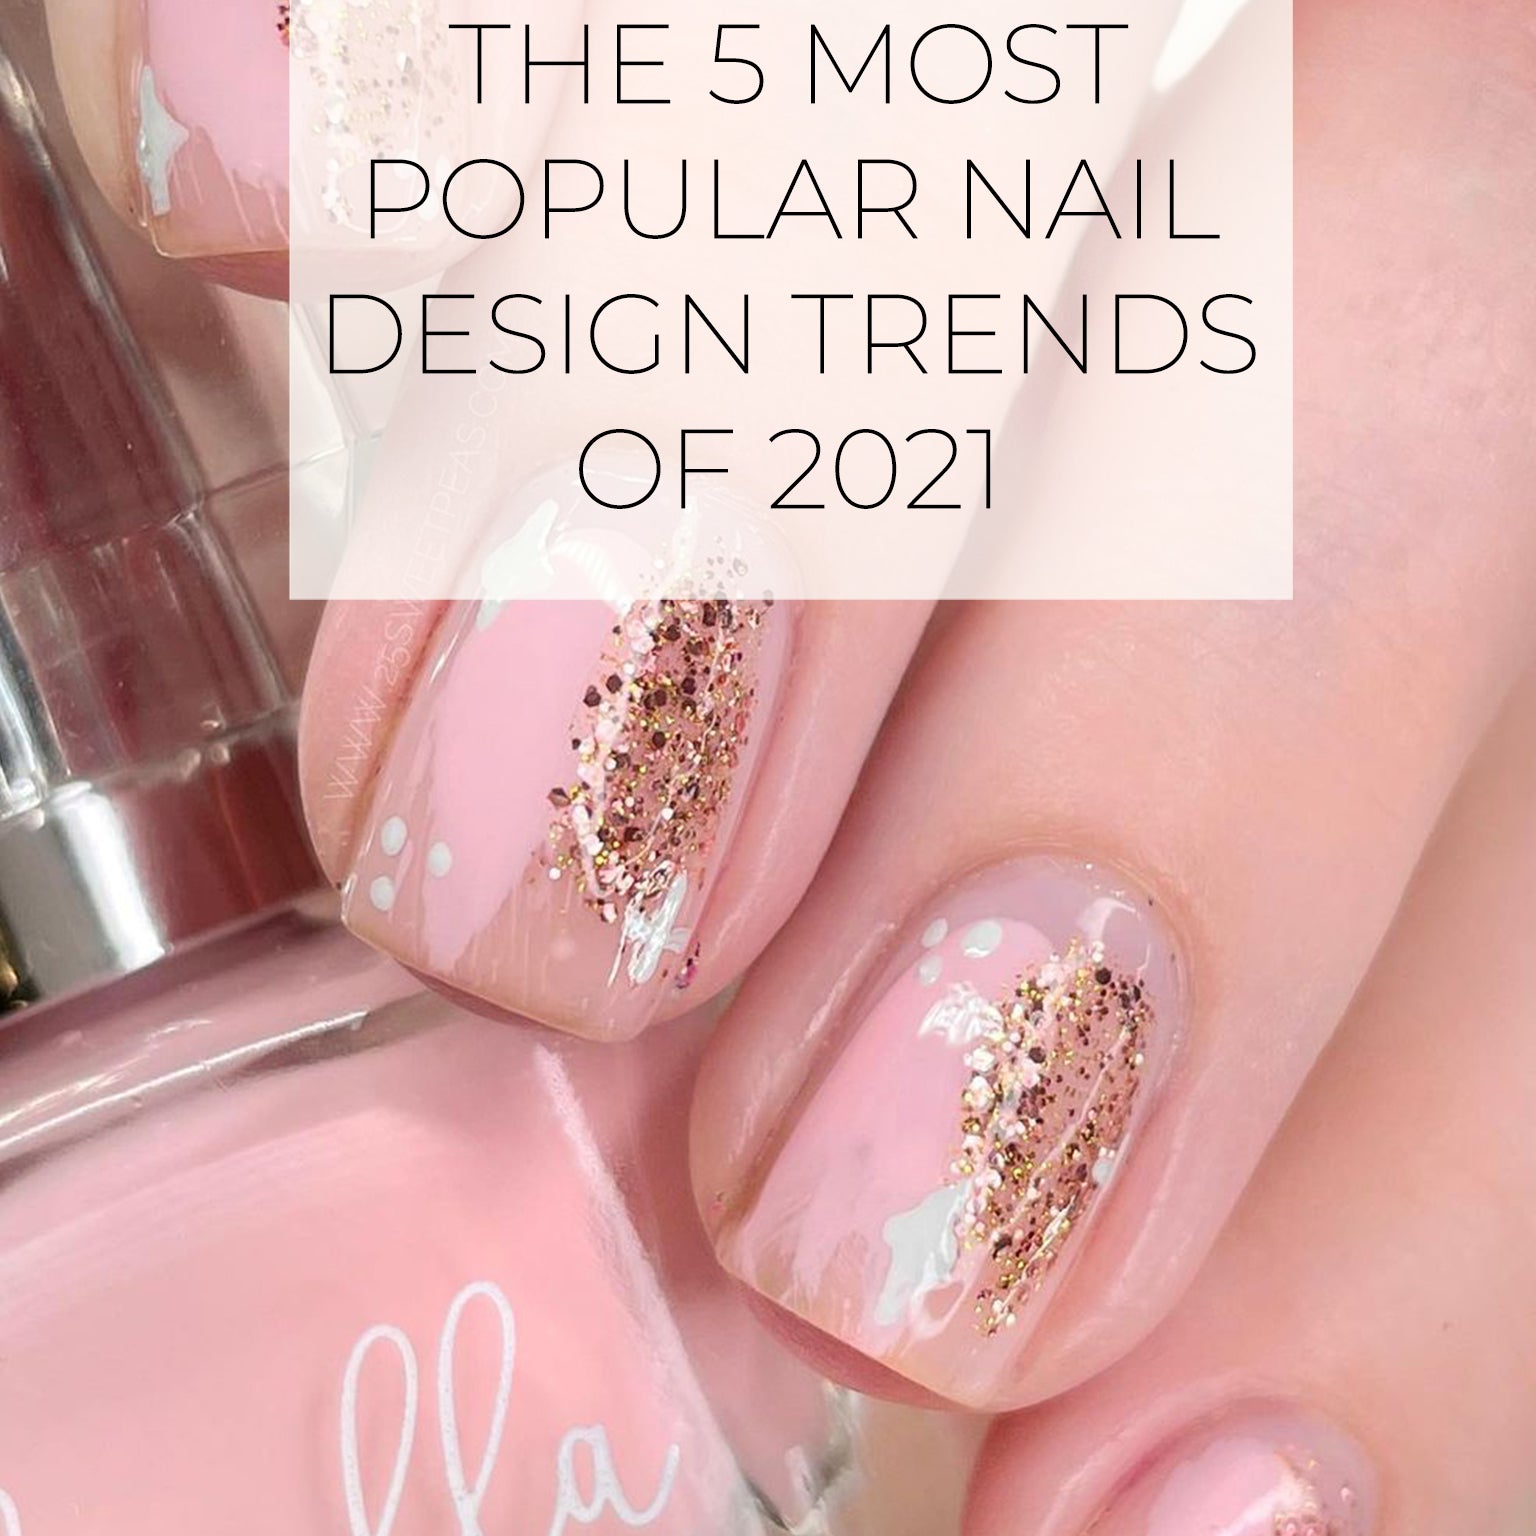 THE 5 MOST POPULAR NAIL DESIGN TRENDS OF 2021